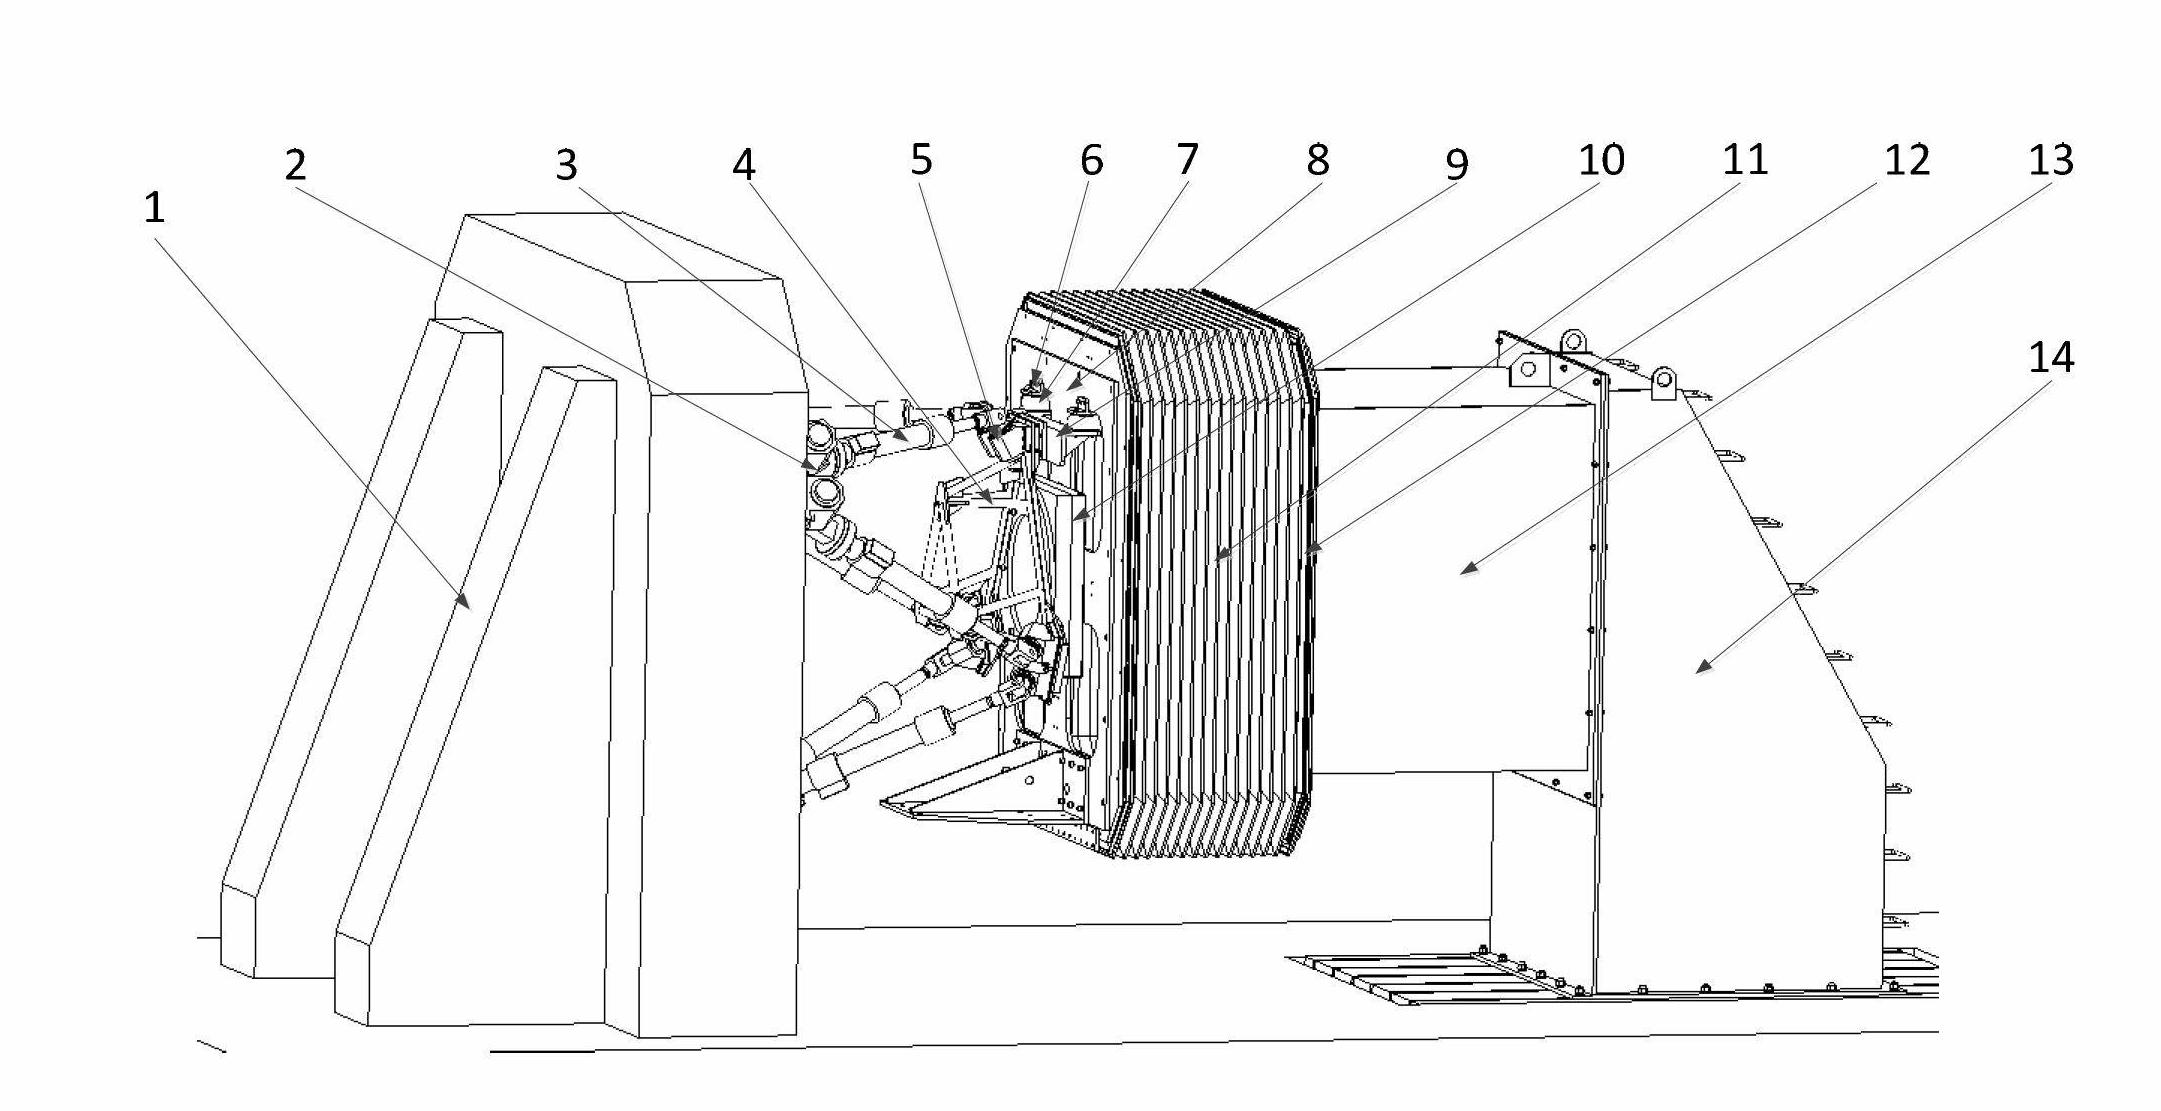 Loading device based on six-degree-of-freedom parallel mechanisms